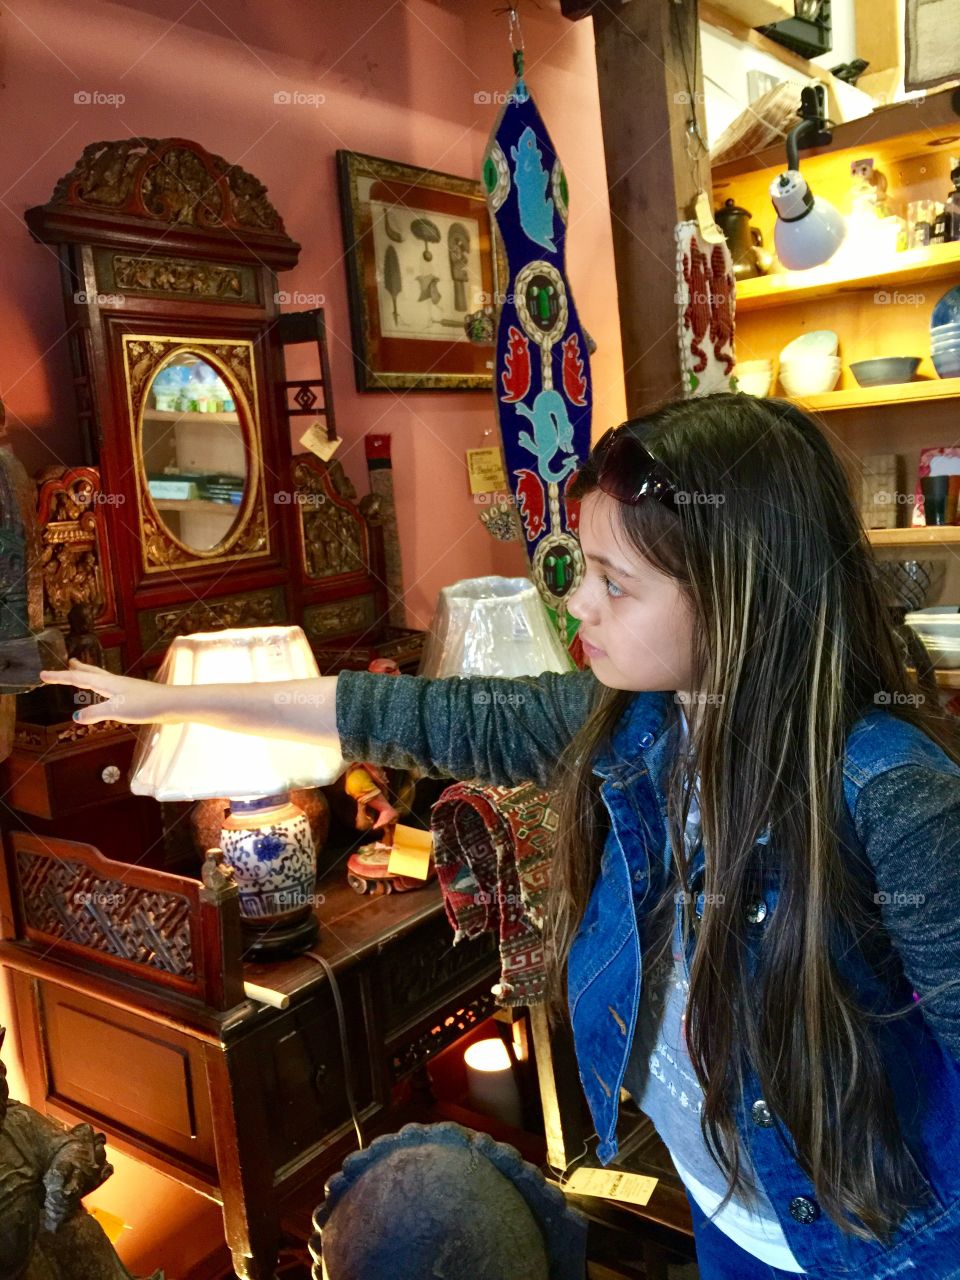 A little girl shopping at the Antique Shop 